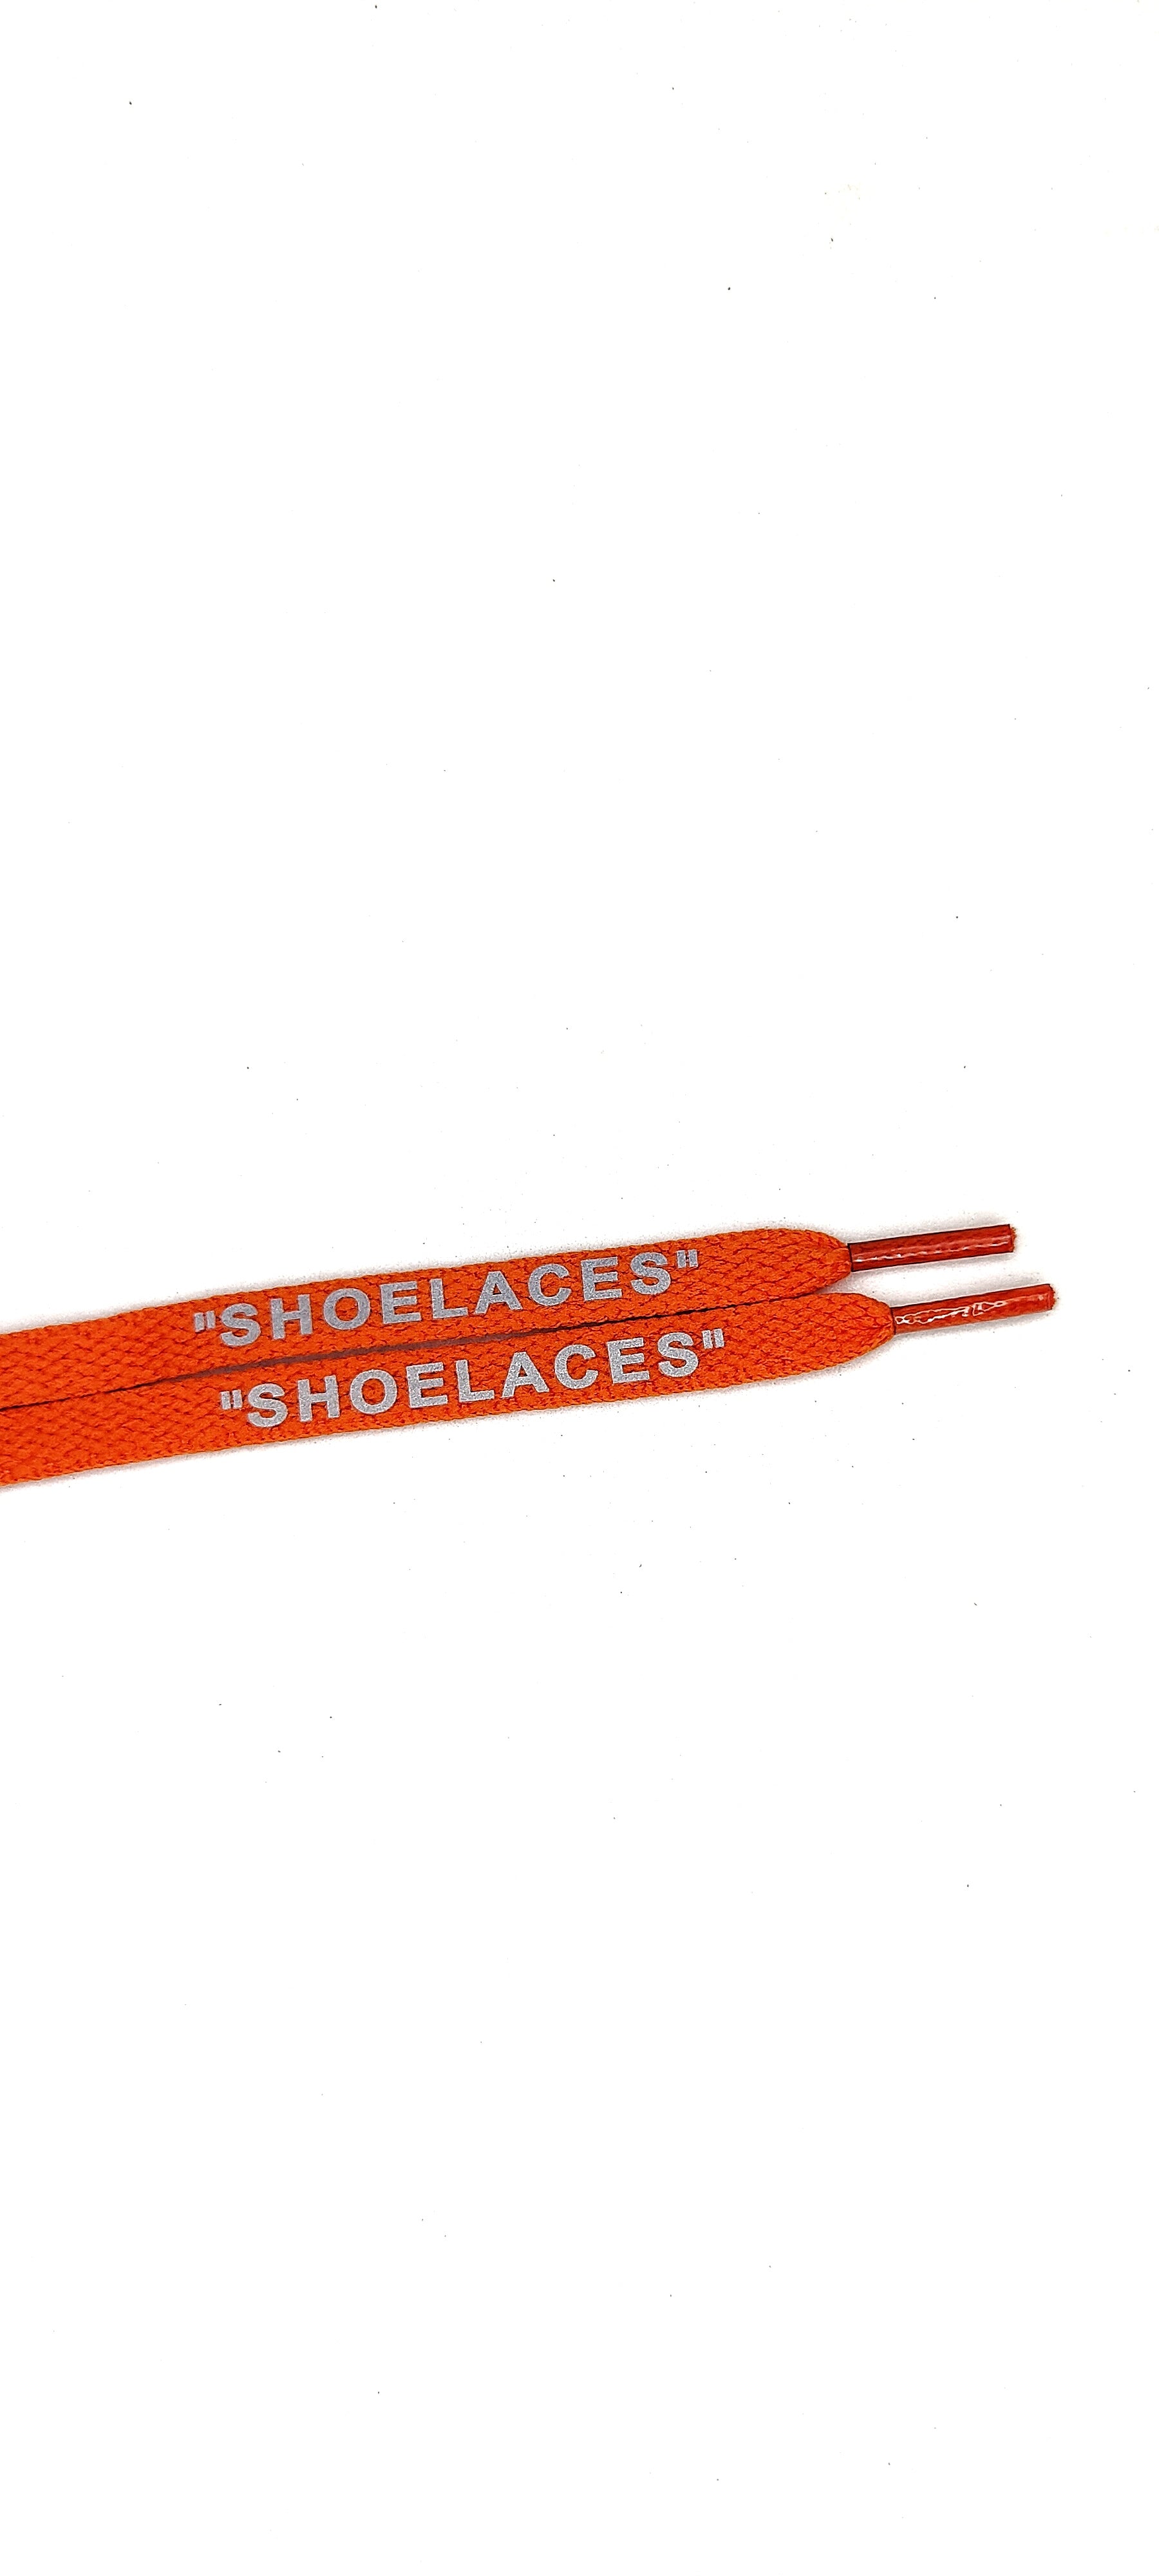 "Shoelaces 3m Reflective" OW style flat lace by TGLC